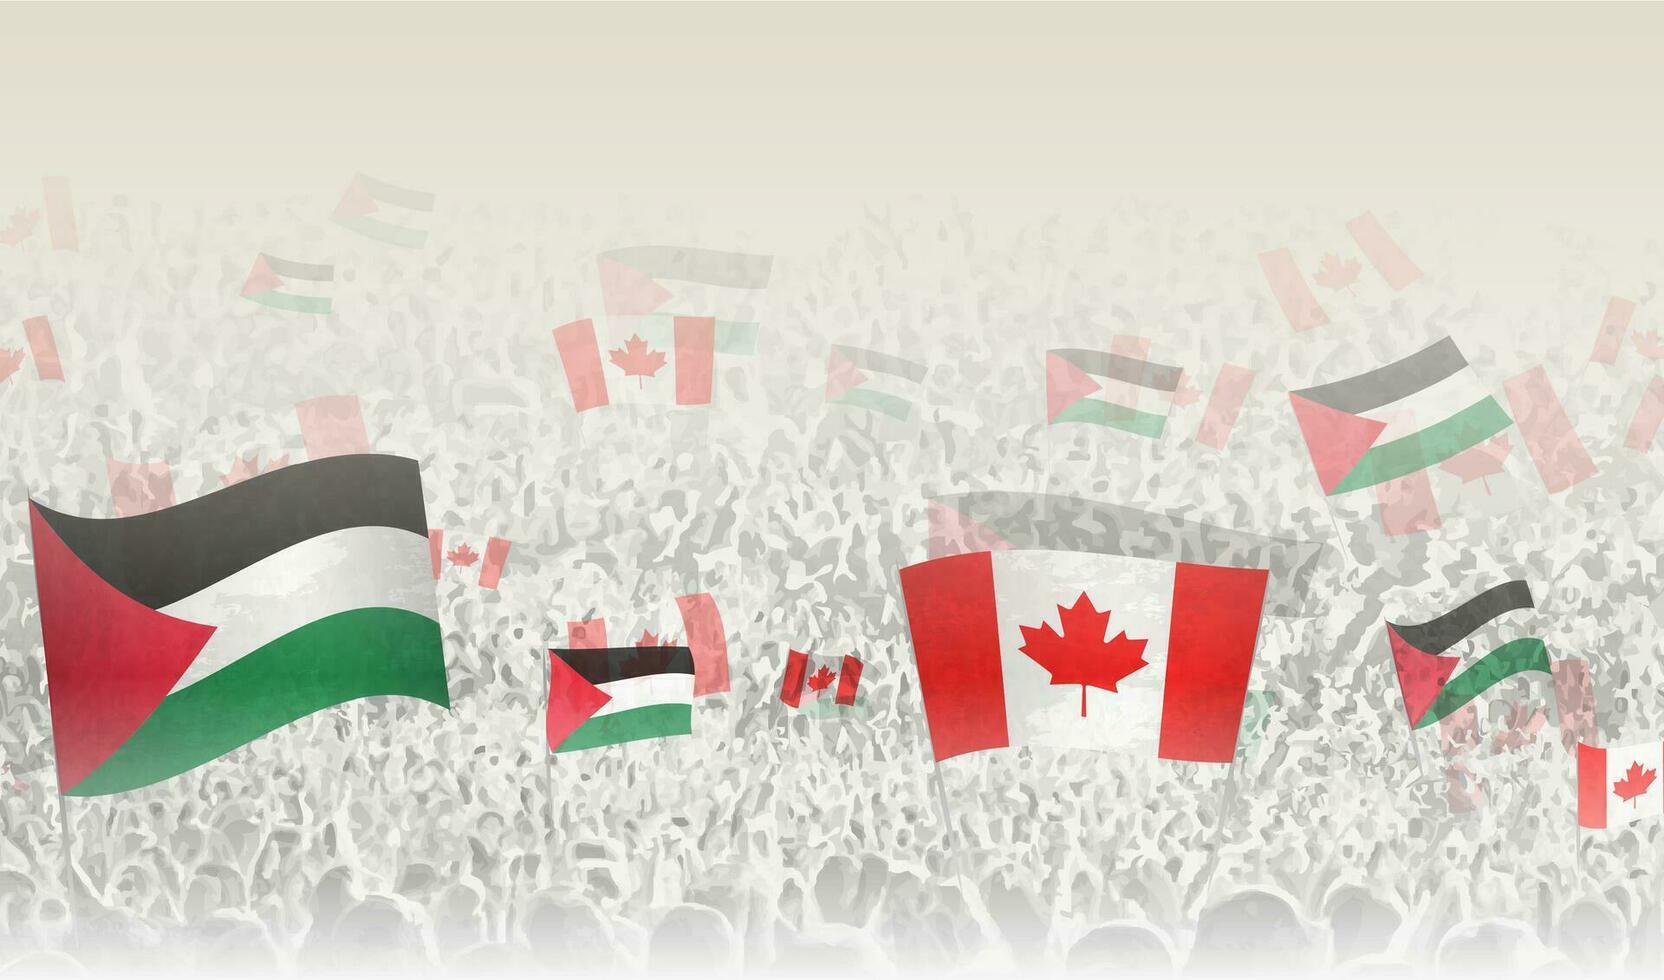 Palestine and Canada flags in a crowd of cheering people. vector